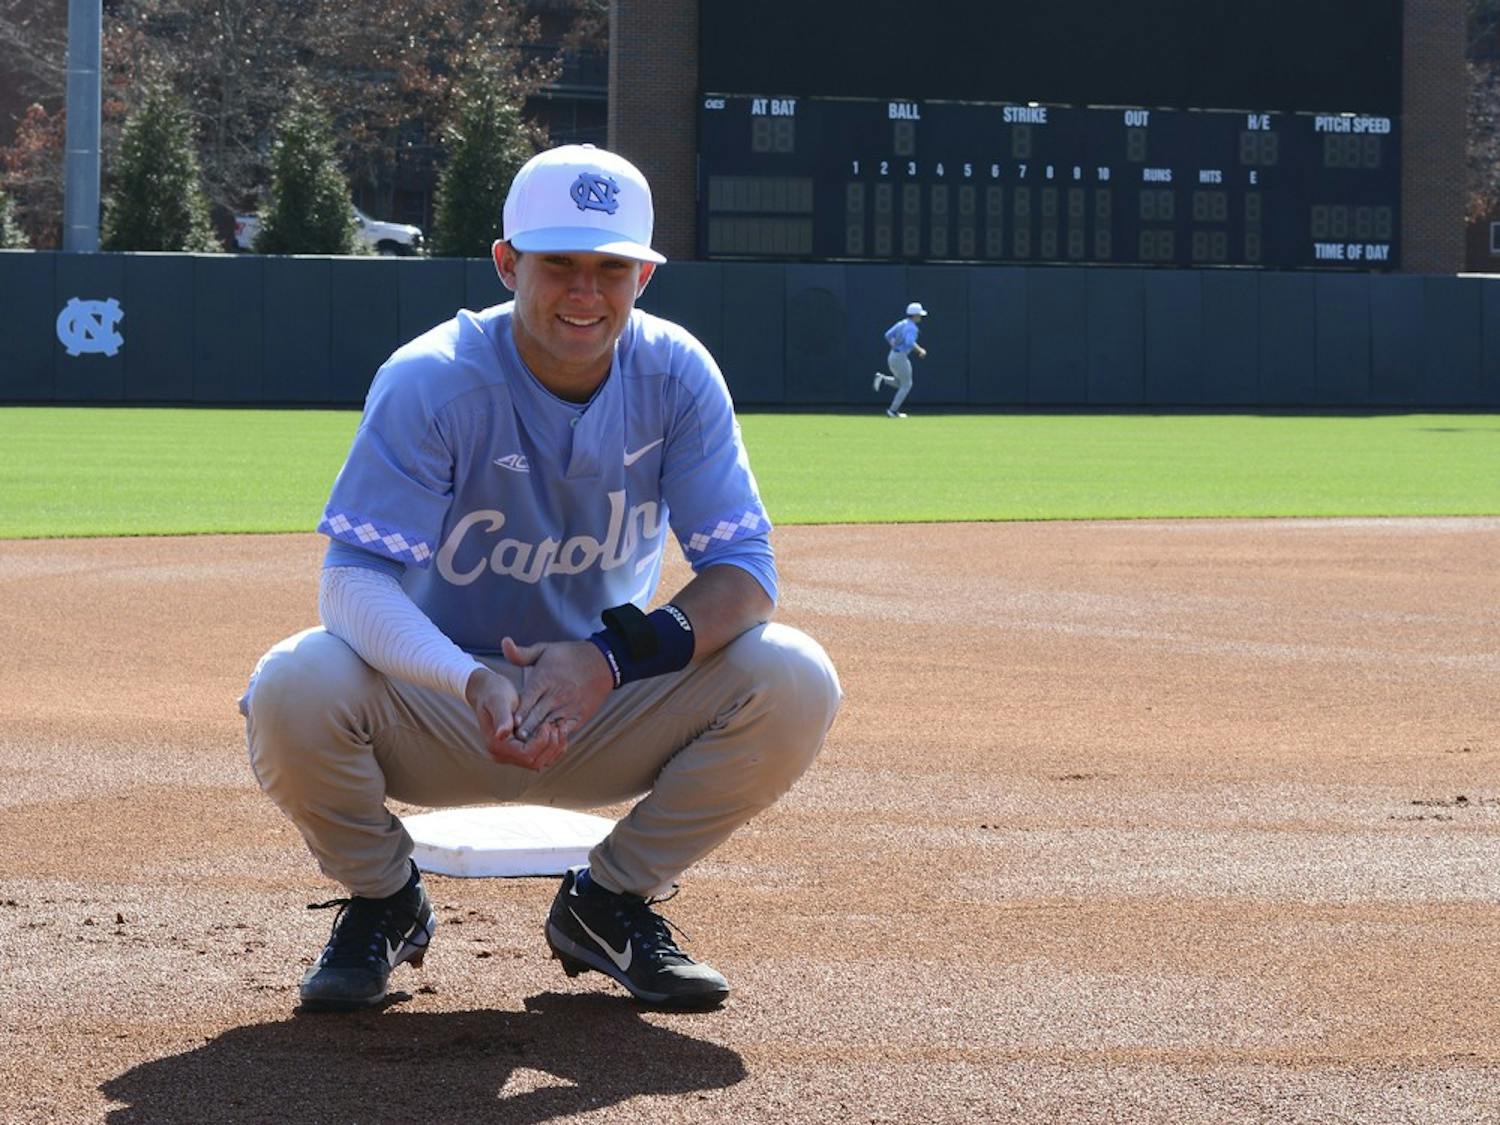 Former UNC shortstop Logan Warmoth grabs some clay in front of the scoreboard at Boshamer Stadium in Chapel Hill.